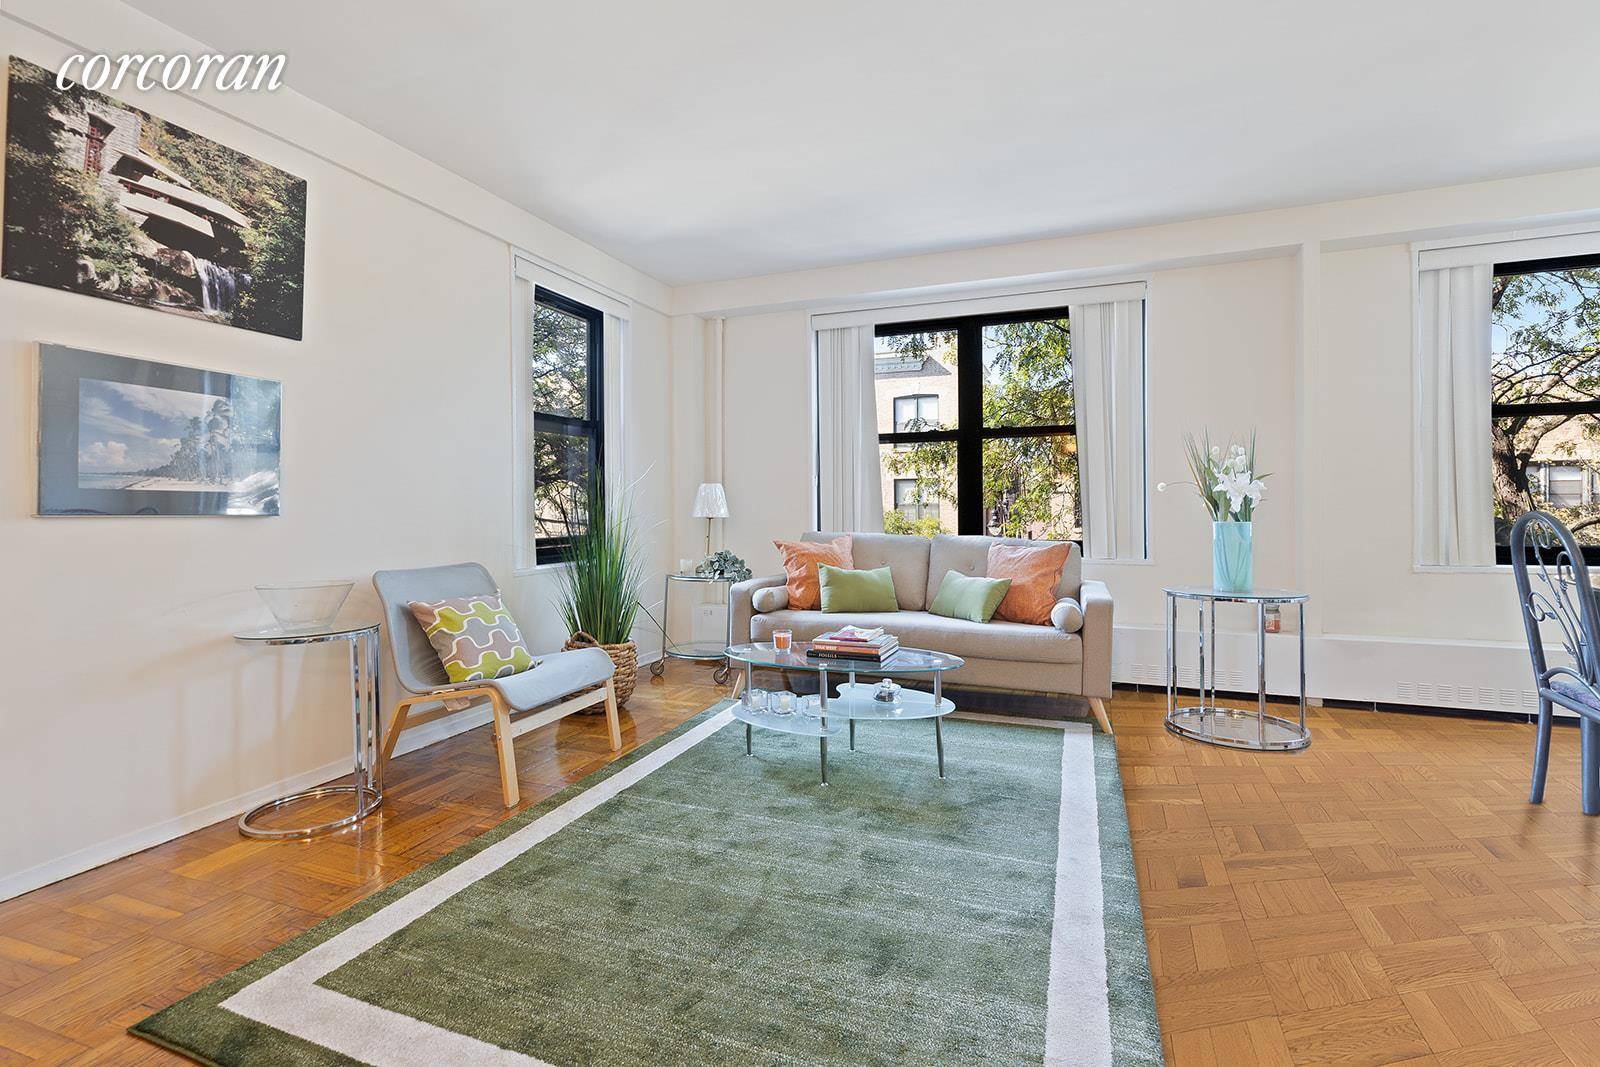 Classic, true two bedroom in Clinton Hill Co Ops, with possibility of third bedroom office.